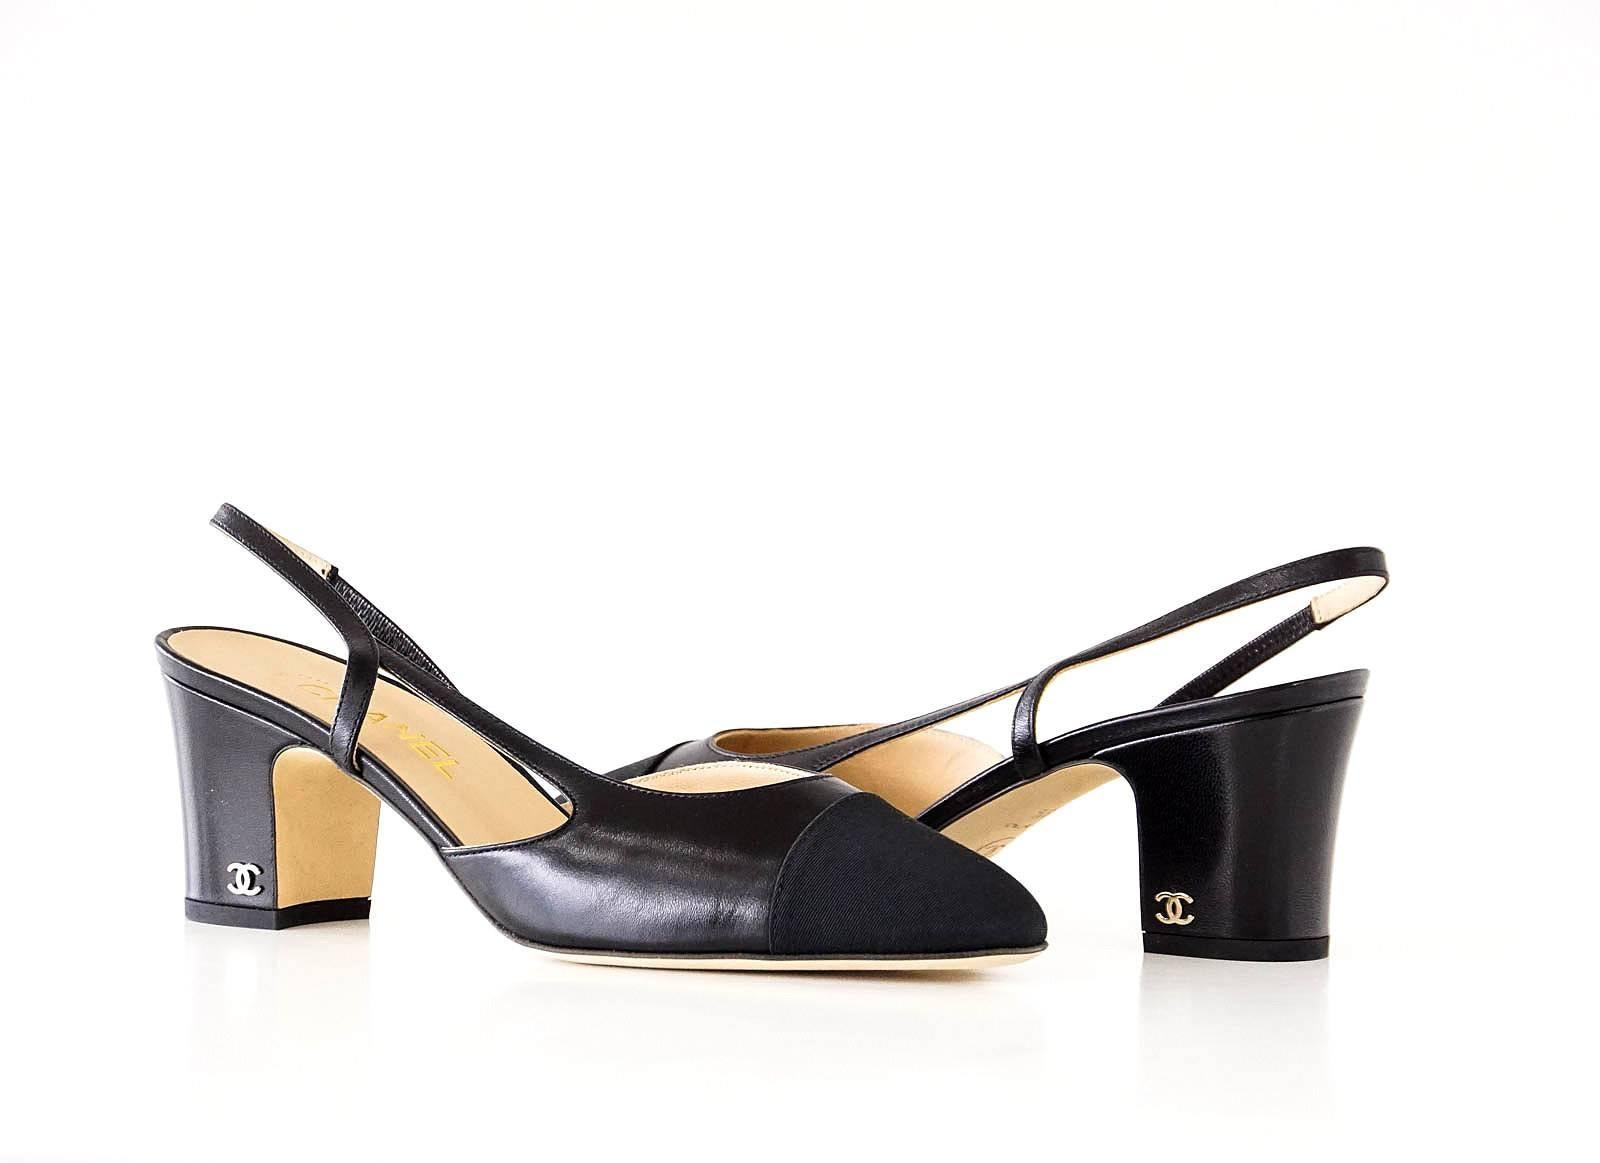 Guaranteed authentic CHANEL Mademoiselle black on black slingback shoe.
The iconic classic leather slingback shoe in black leather with black grosgrain cap toe.
65 mm block heel with signature gold CC logo. 
Comes with original Chanel box and